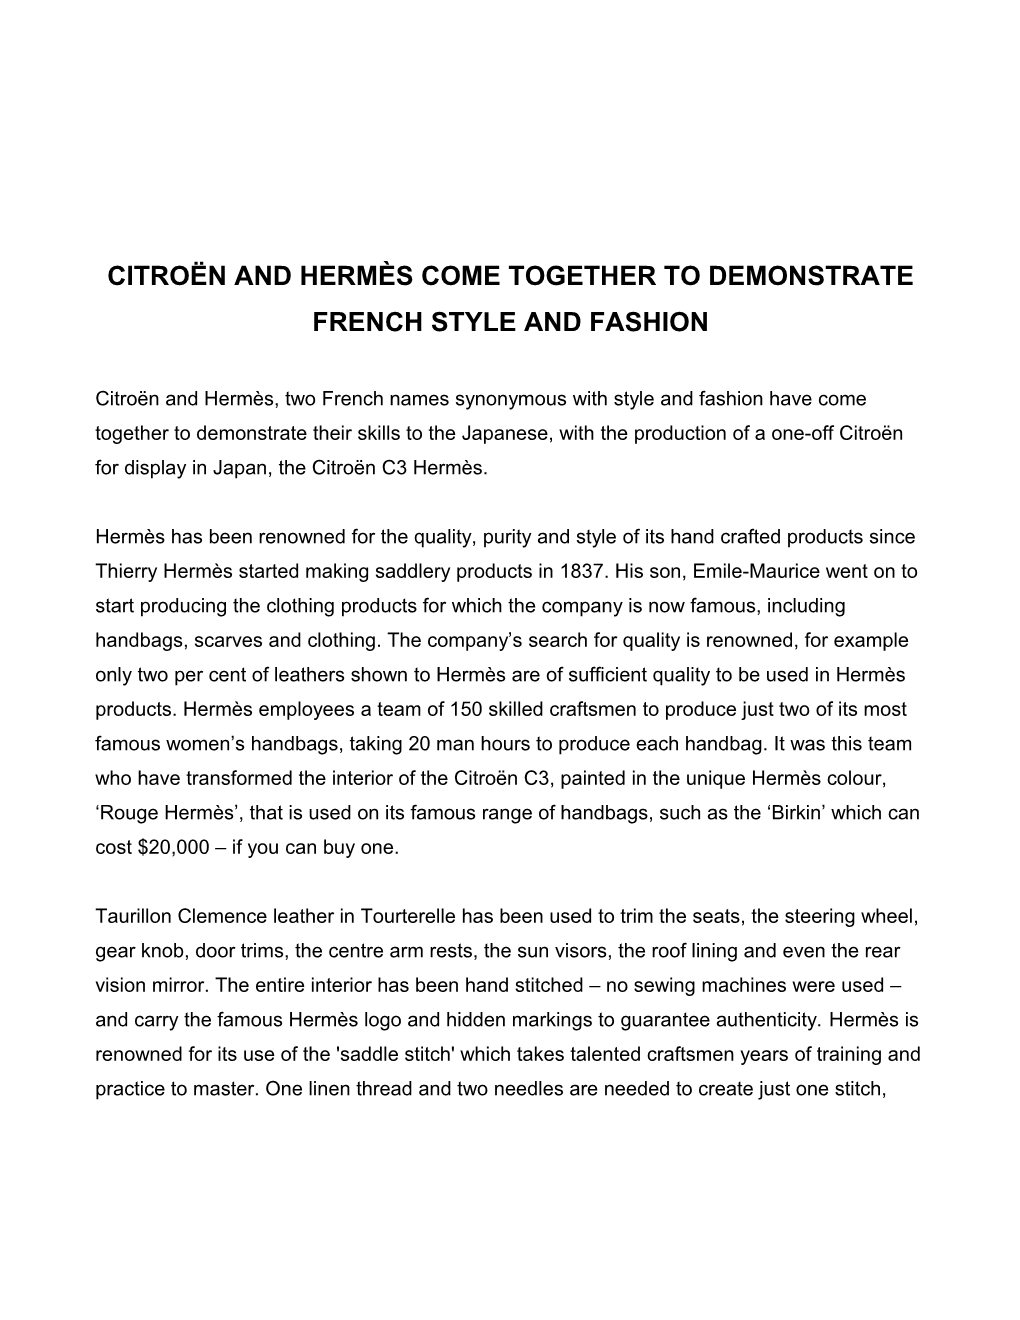 Citroën and Hermès Come Together to Demonstrate French Style and Fashion